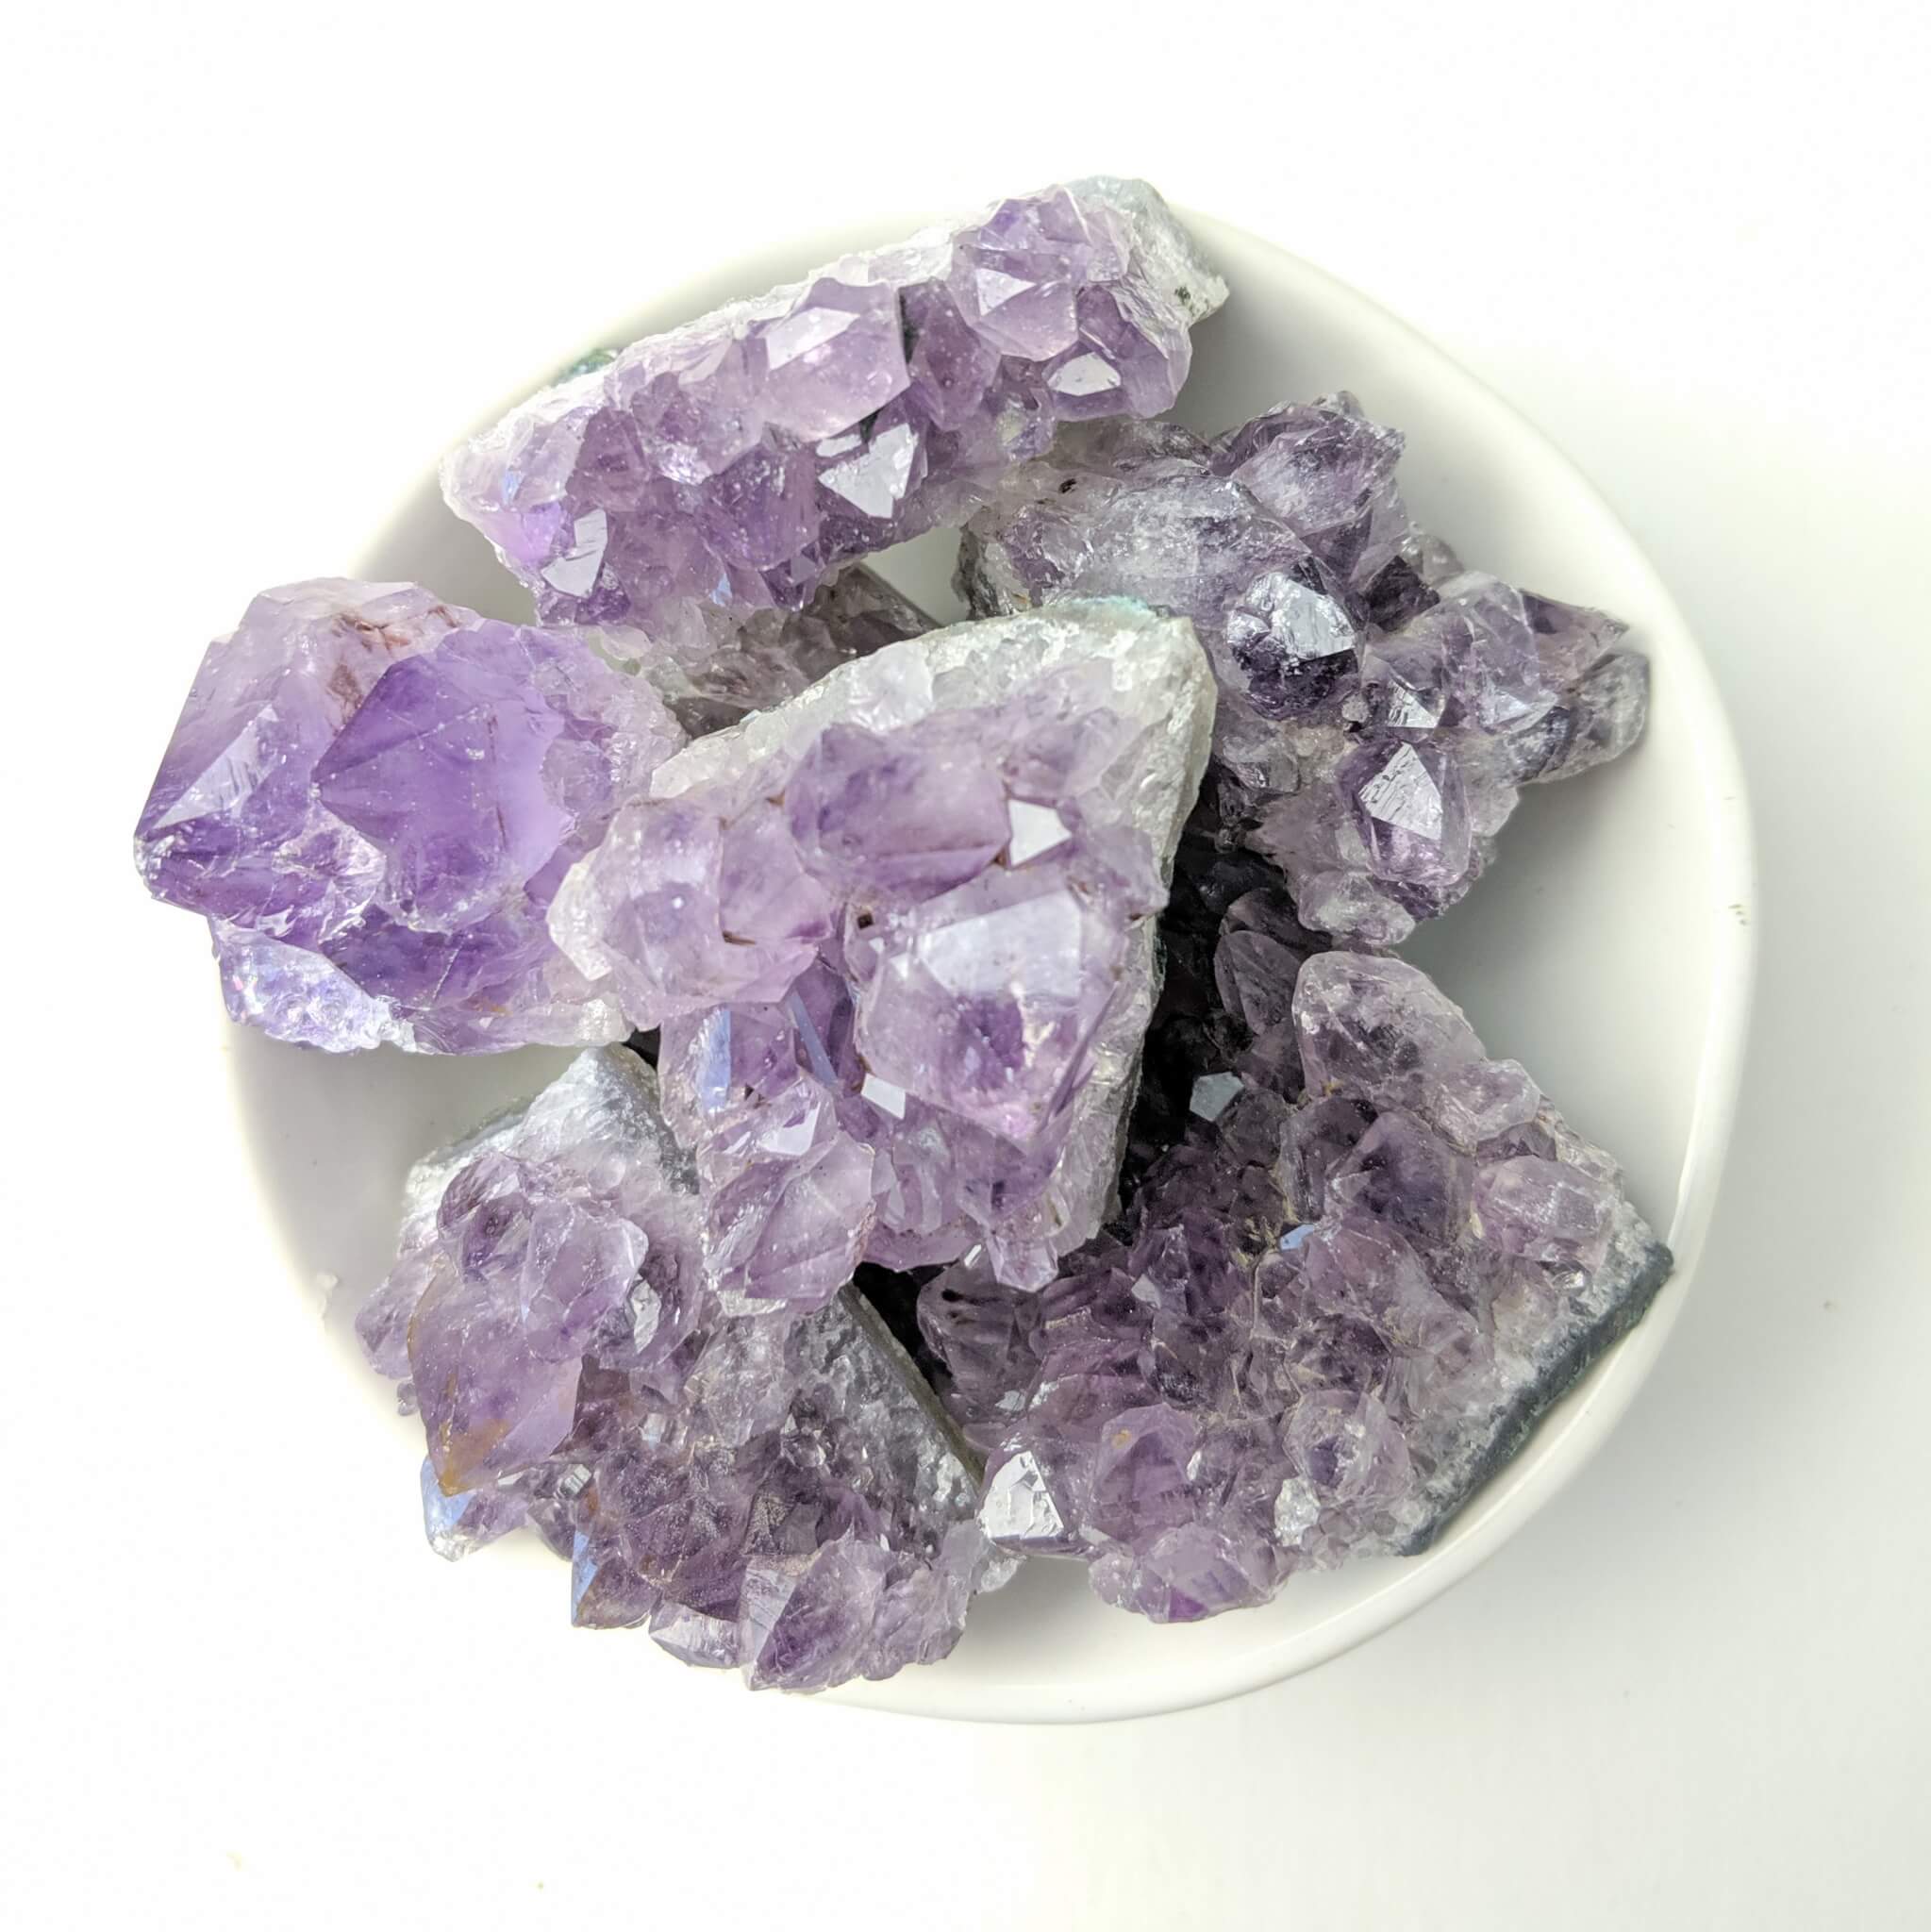 Amethyst Crystal Clusters in a White Bowl Top View